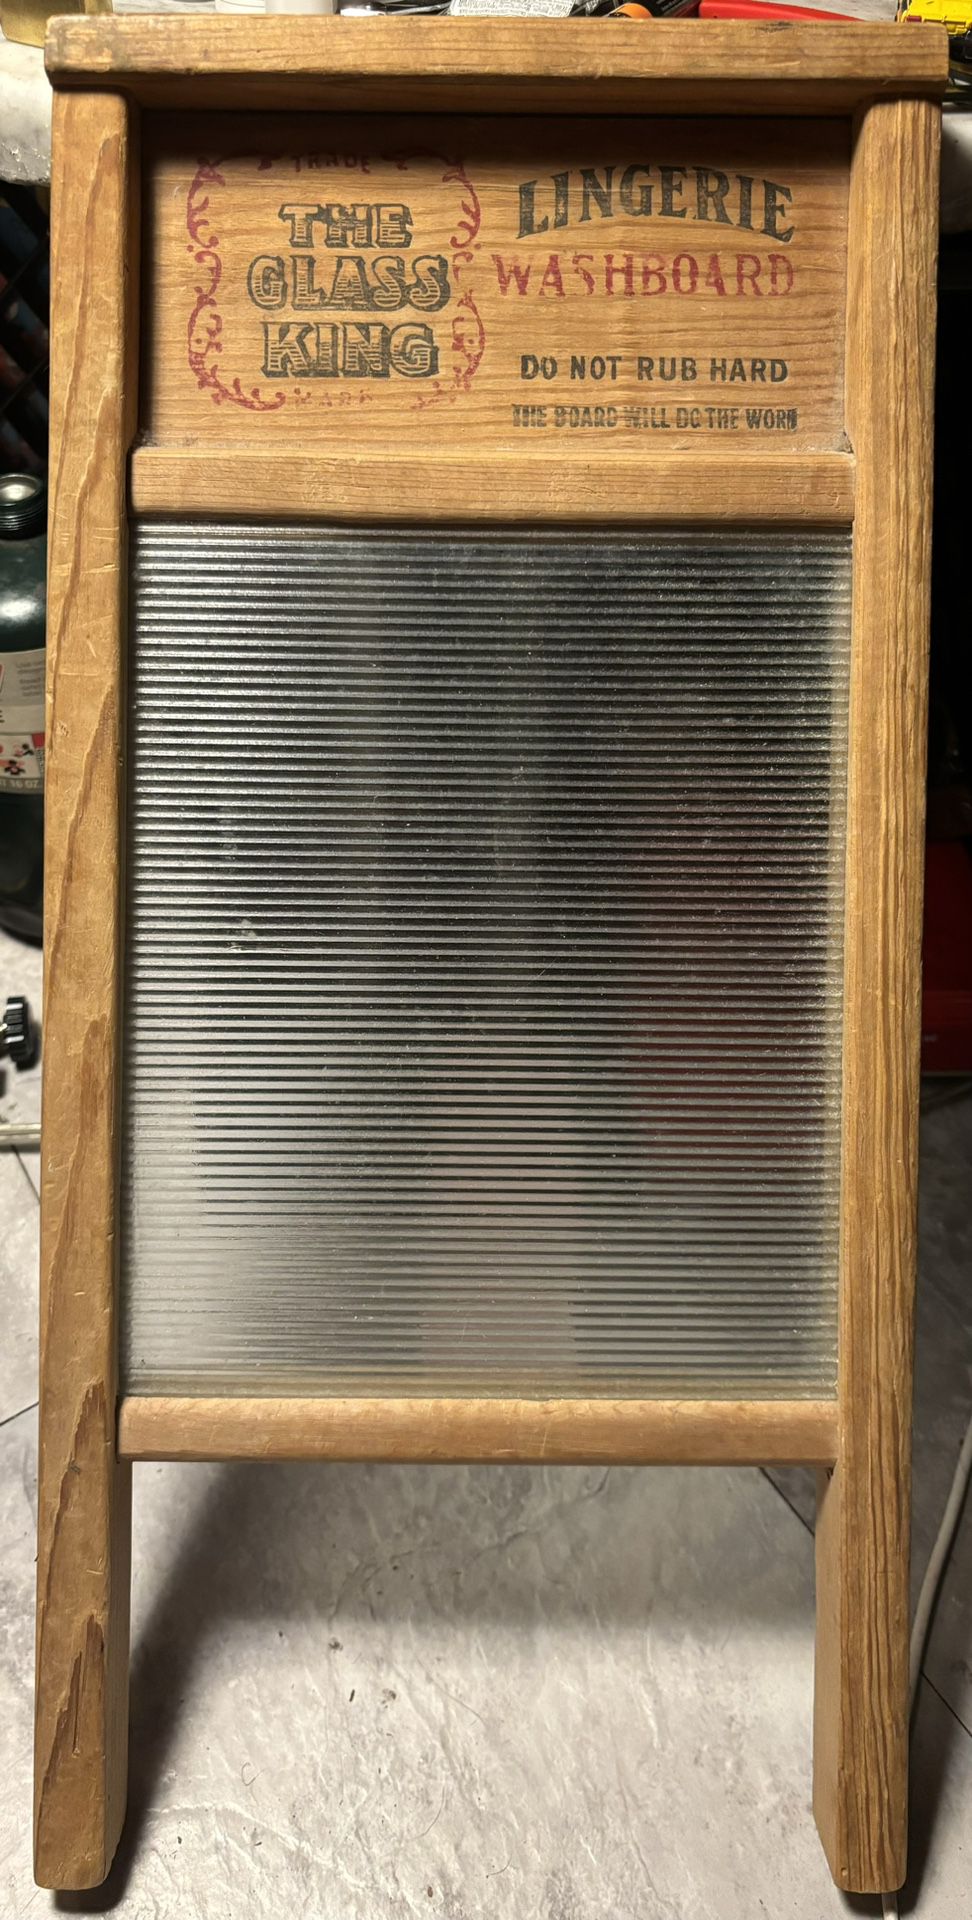 Vintage National Washboard Co. The Glass King No. 863 Lingerie Washer